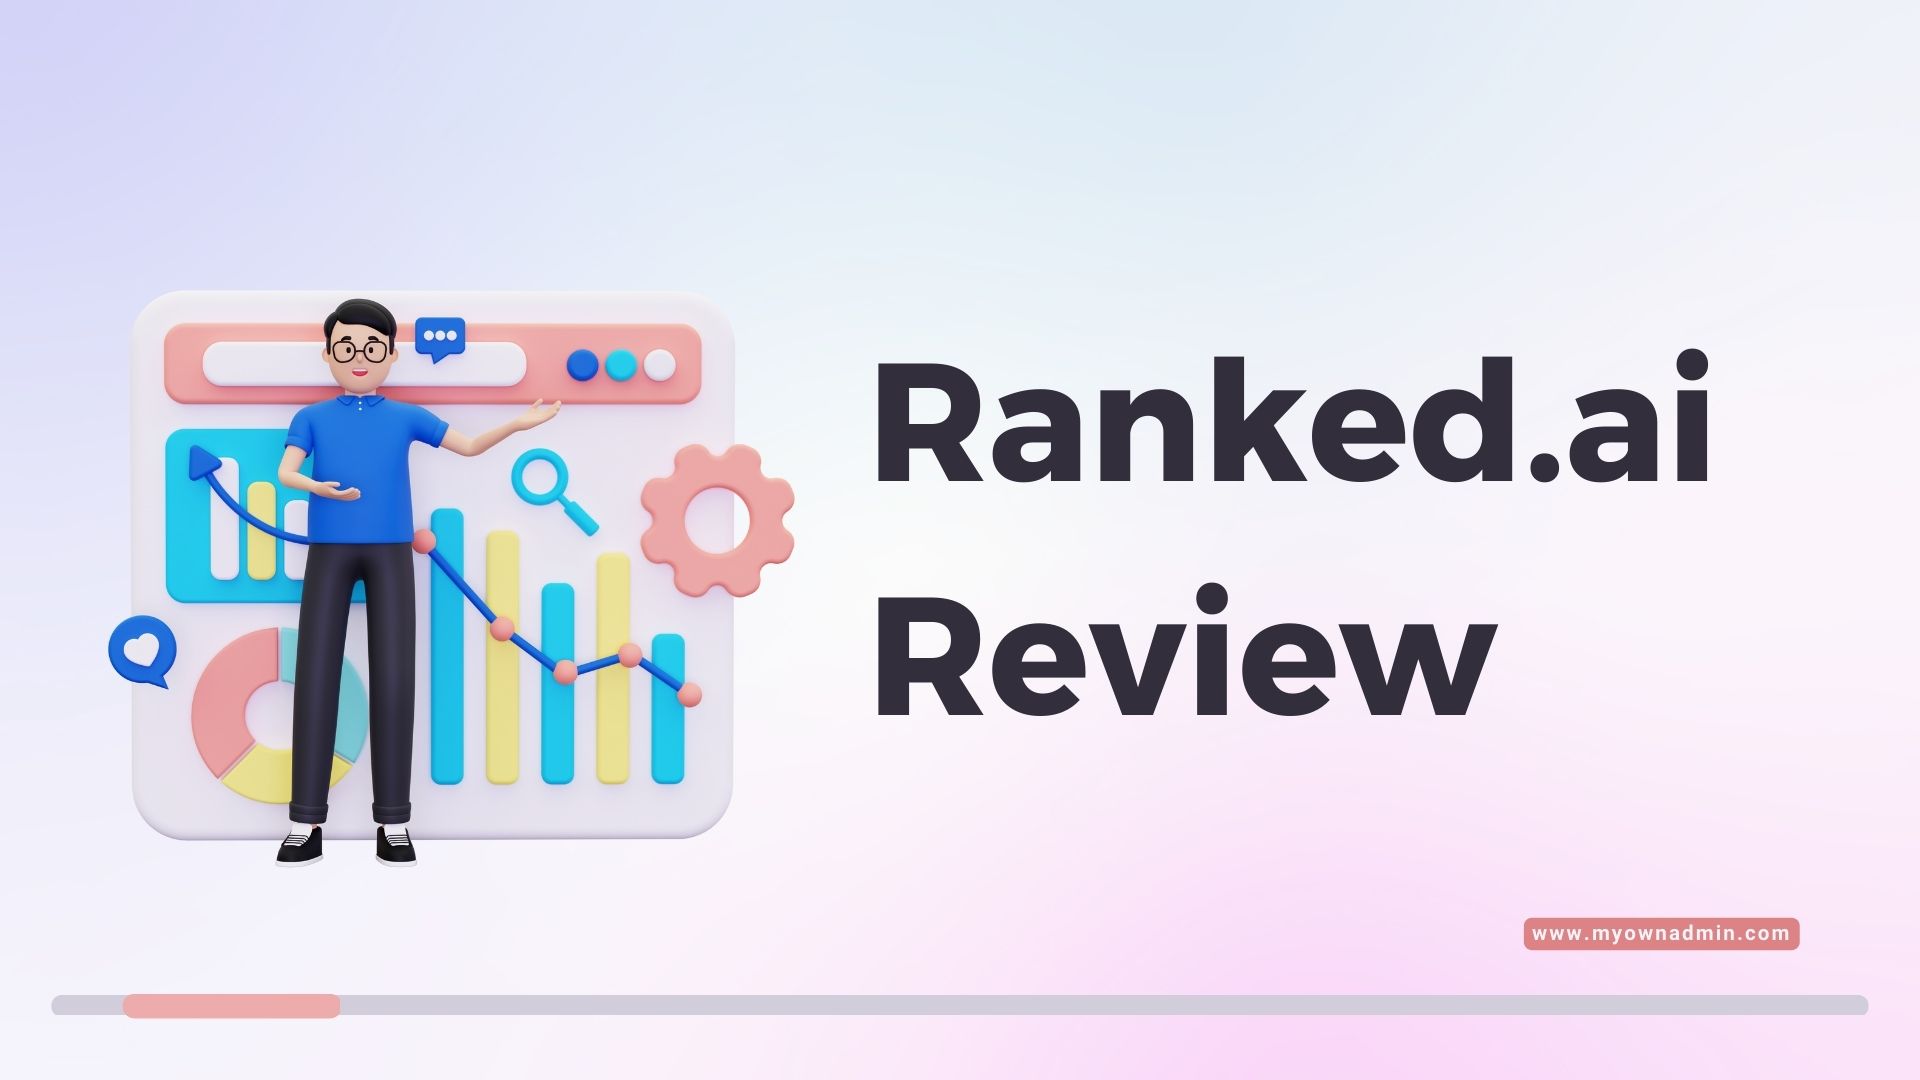 Ranked.ai Review